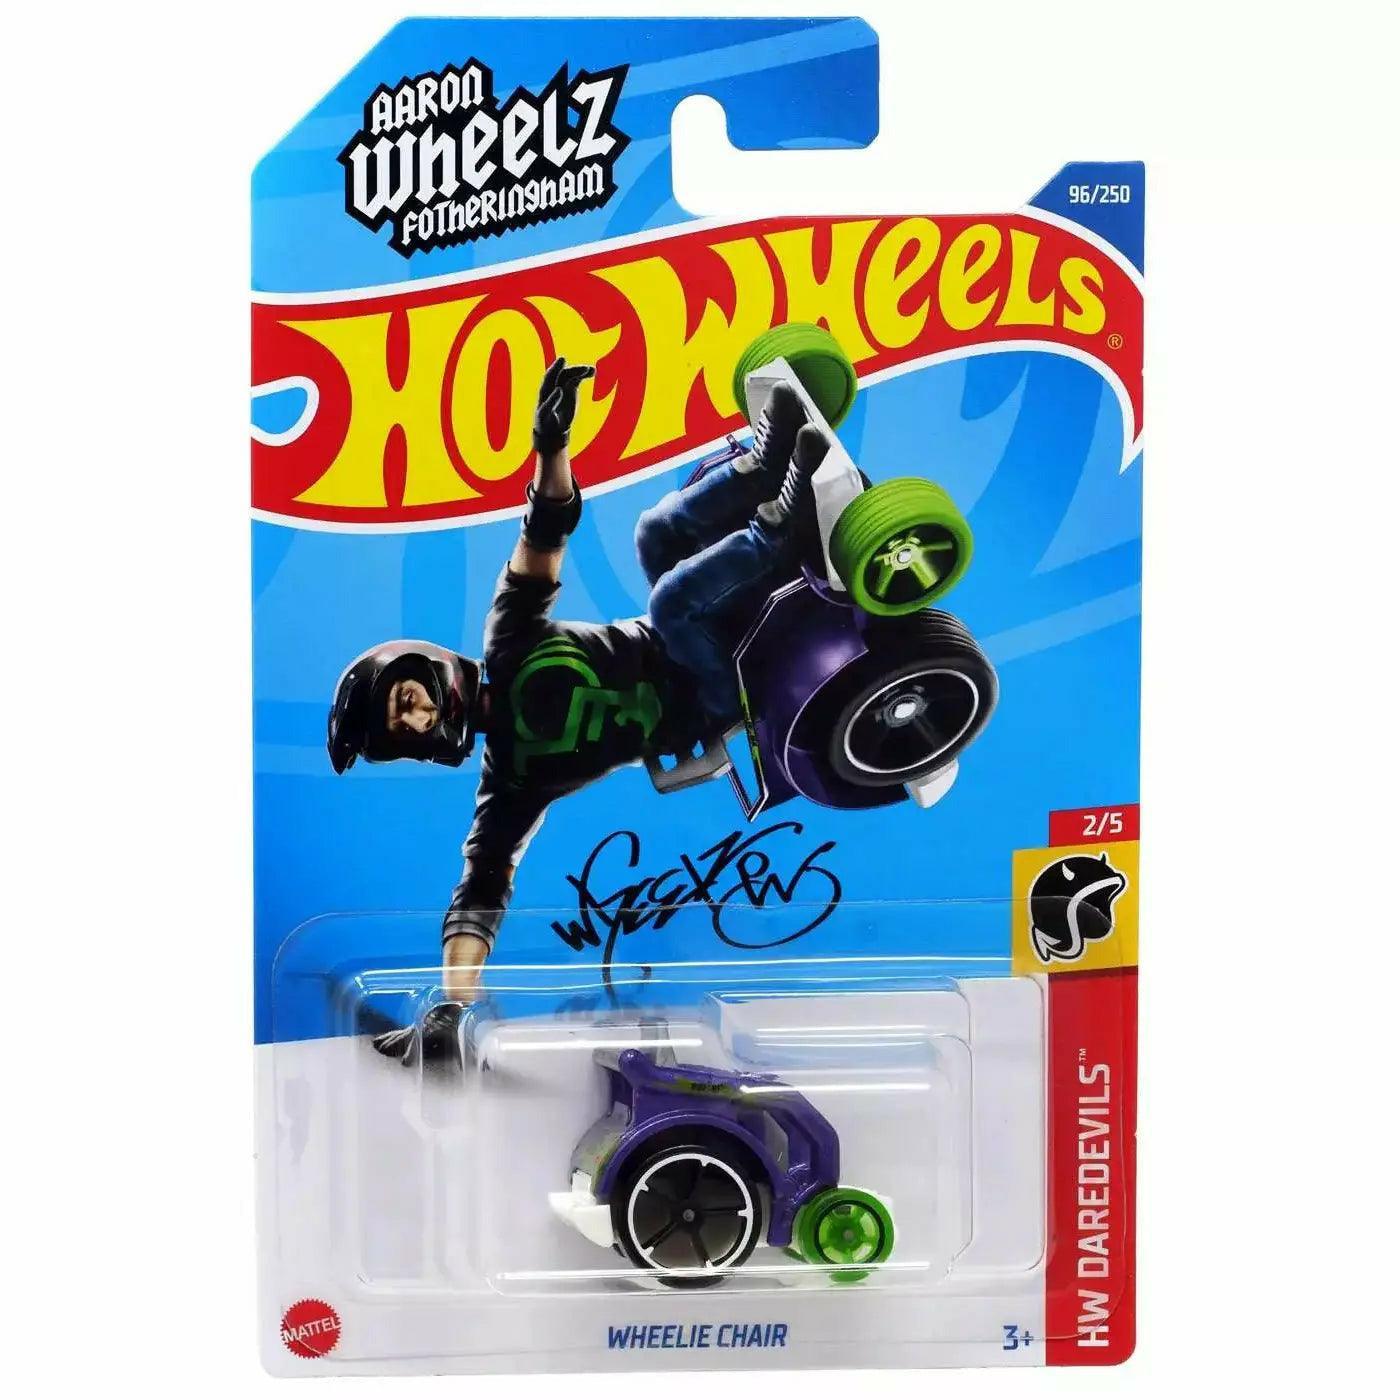 Hot Wheels Die Cast 1:64 Scale Vehicle HW Daredevils Car - Wheelie Chair - BumbleToys - 2-4 Years, 5-7 Years, Boys, Collectible Vehicles